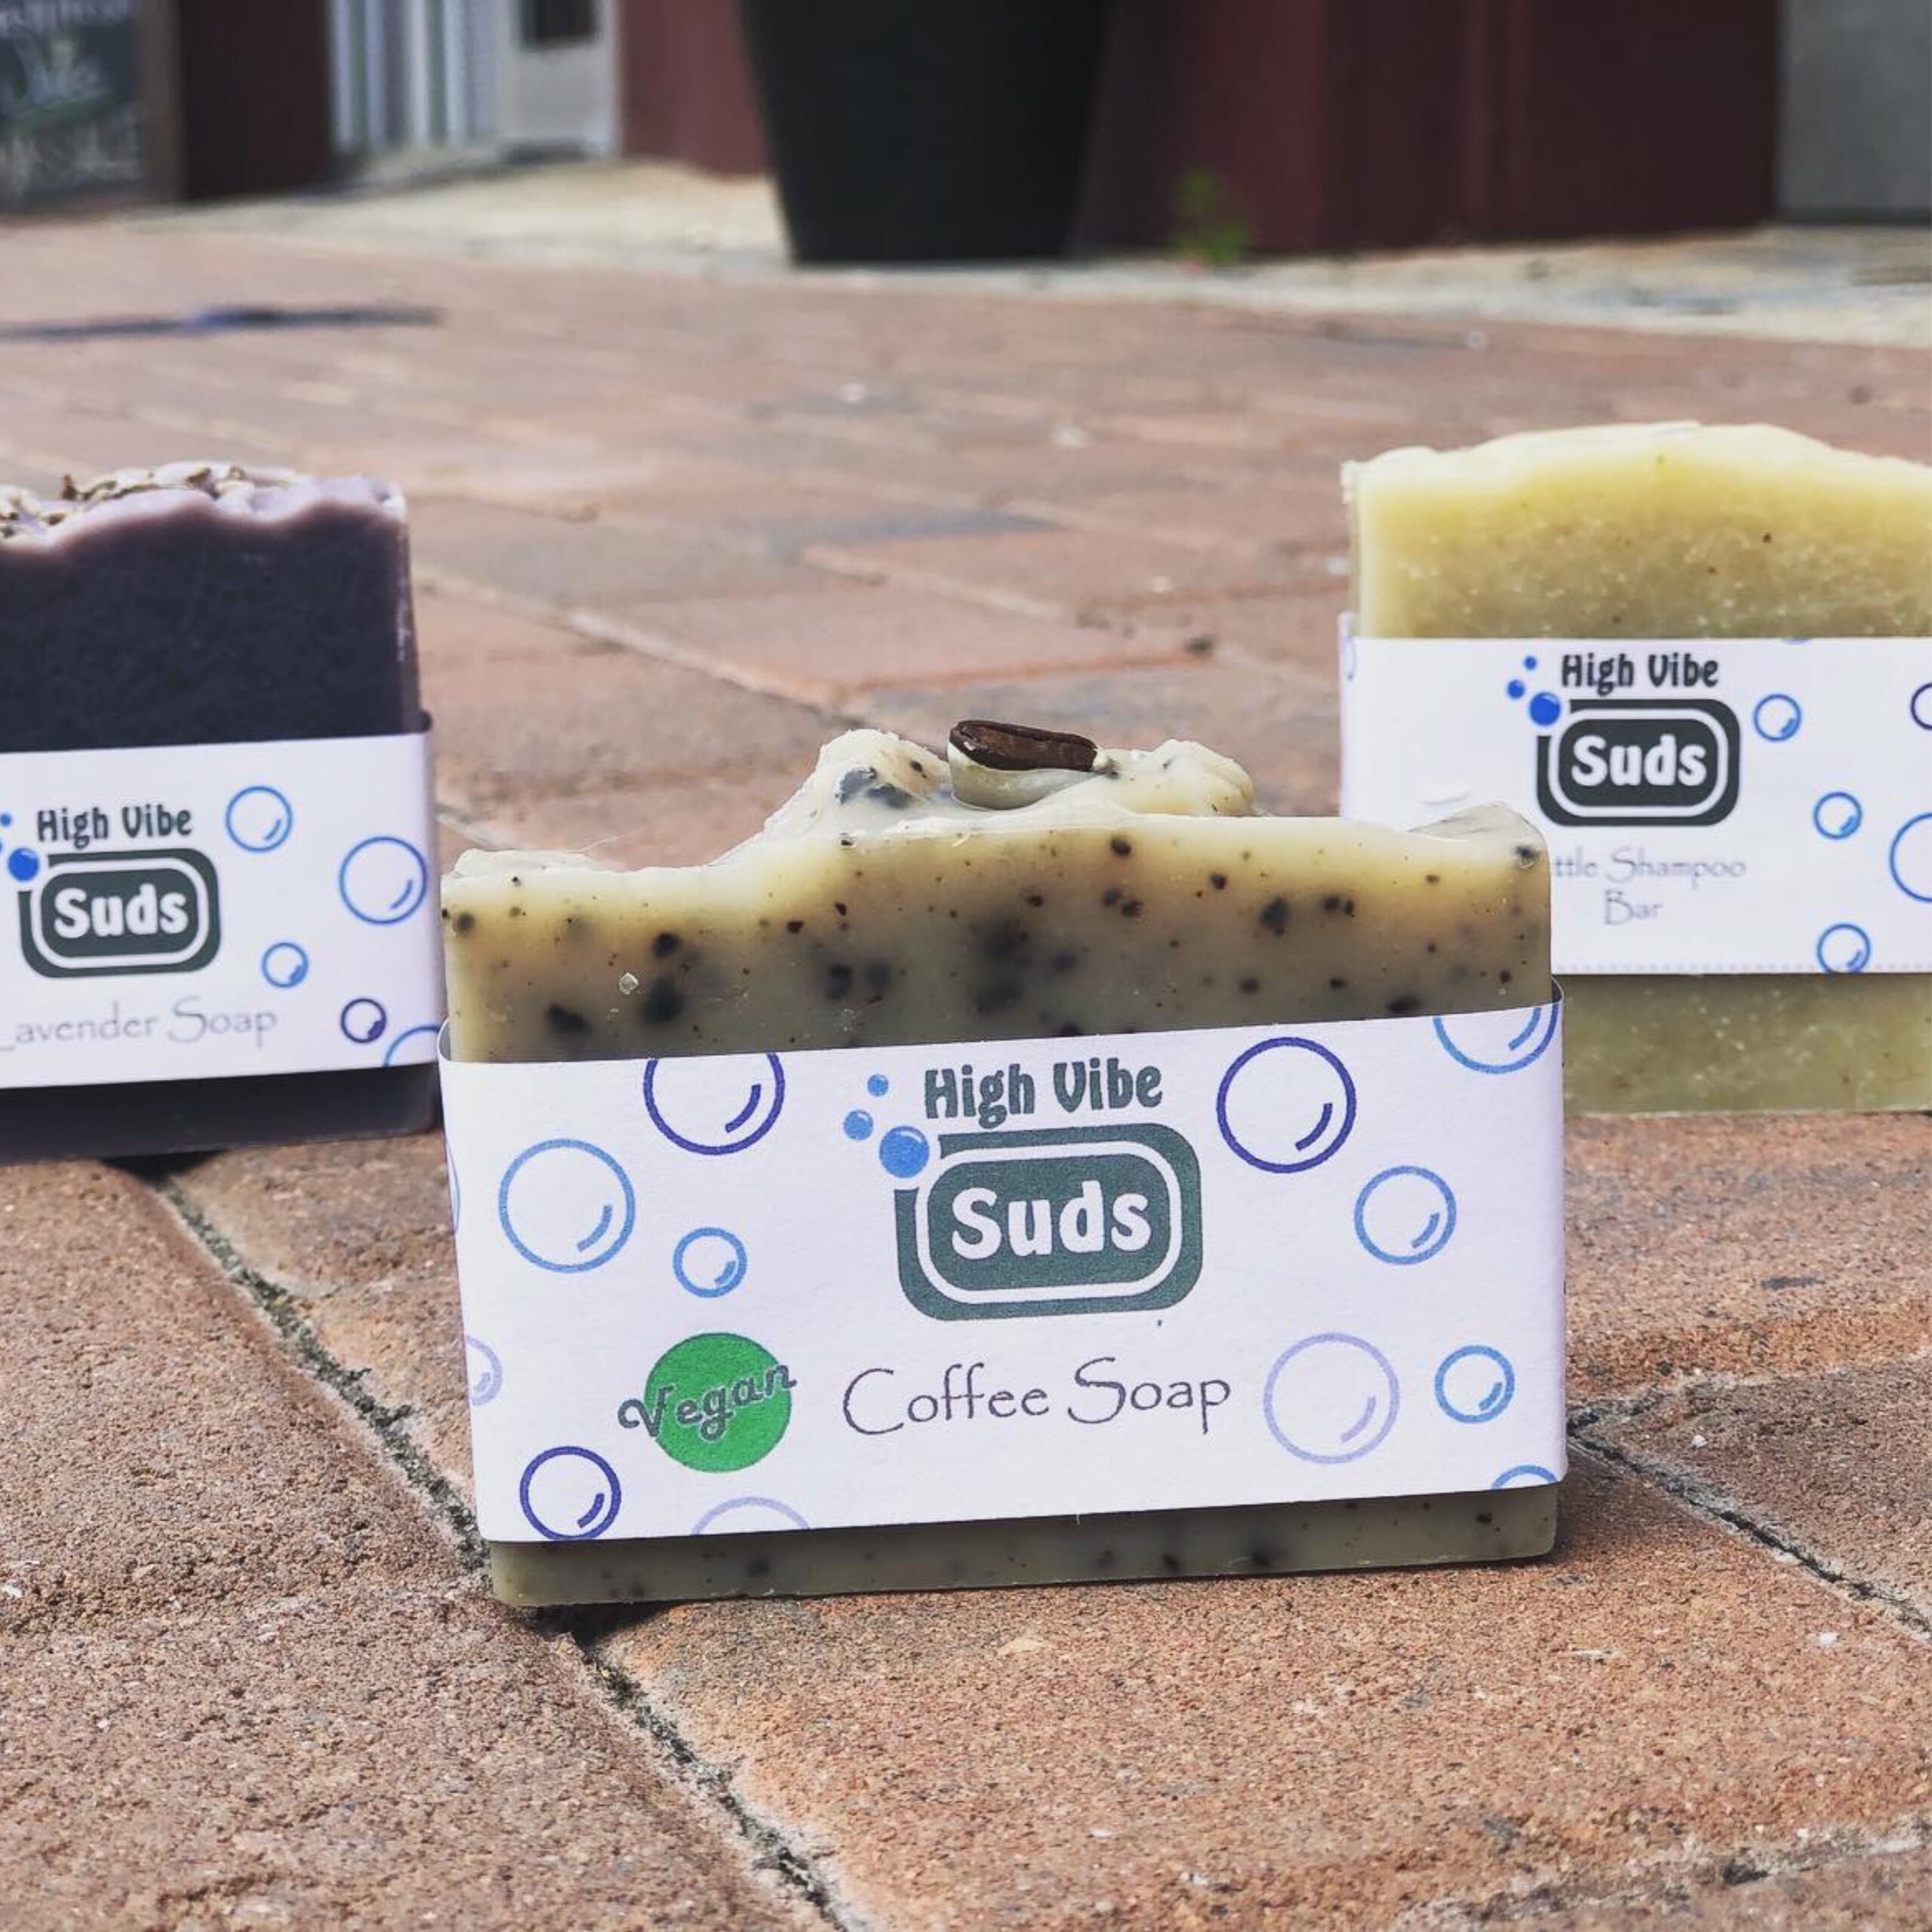 High Vibes Suds Soap